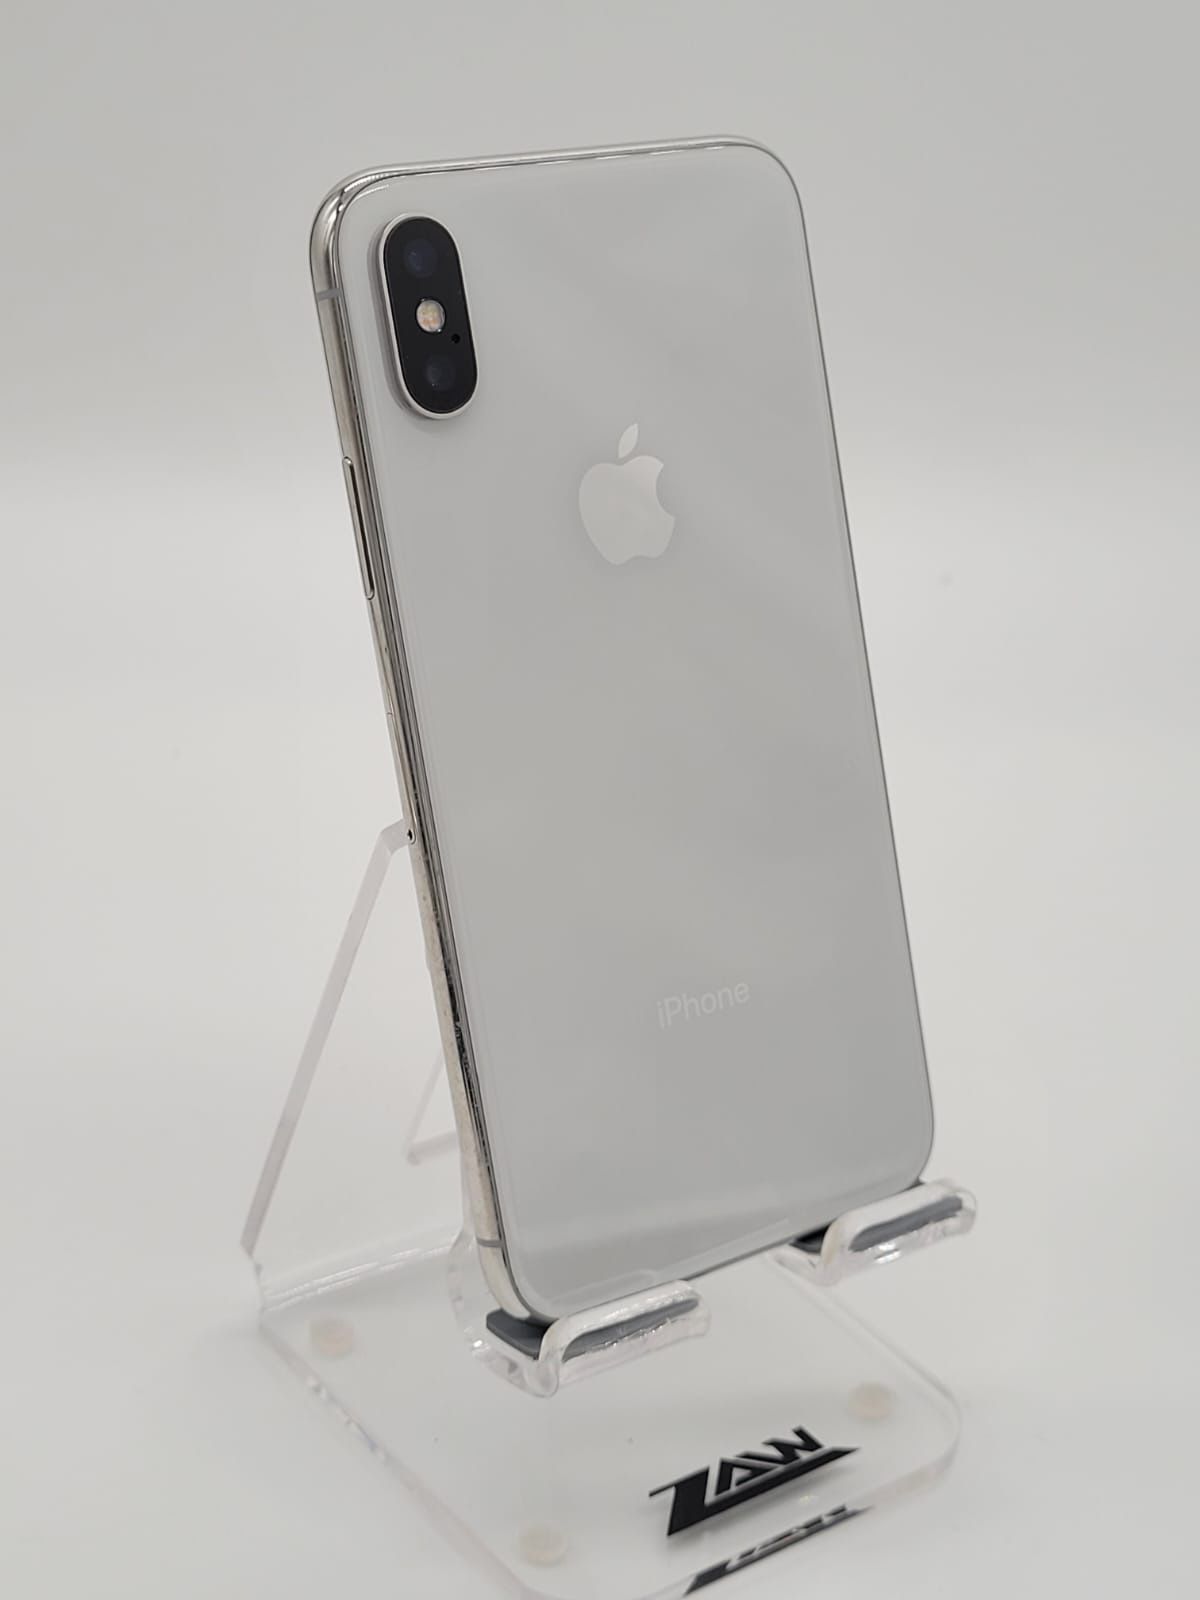 💥🔥iPhone X, 64Gb, Unlocked For Any Company, White Color, Excellent Condition 